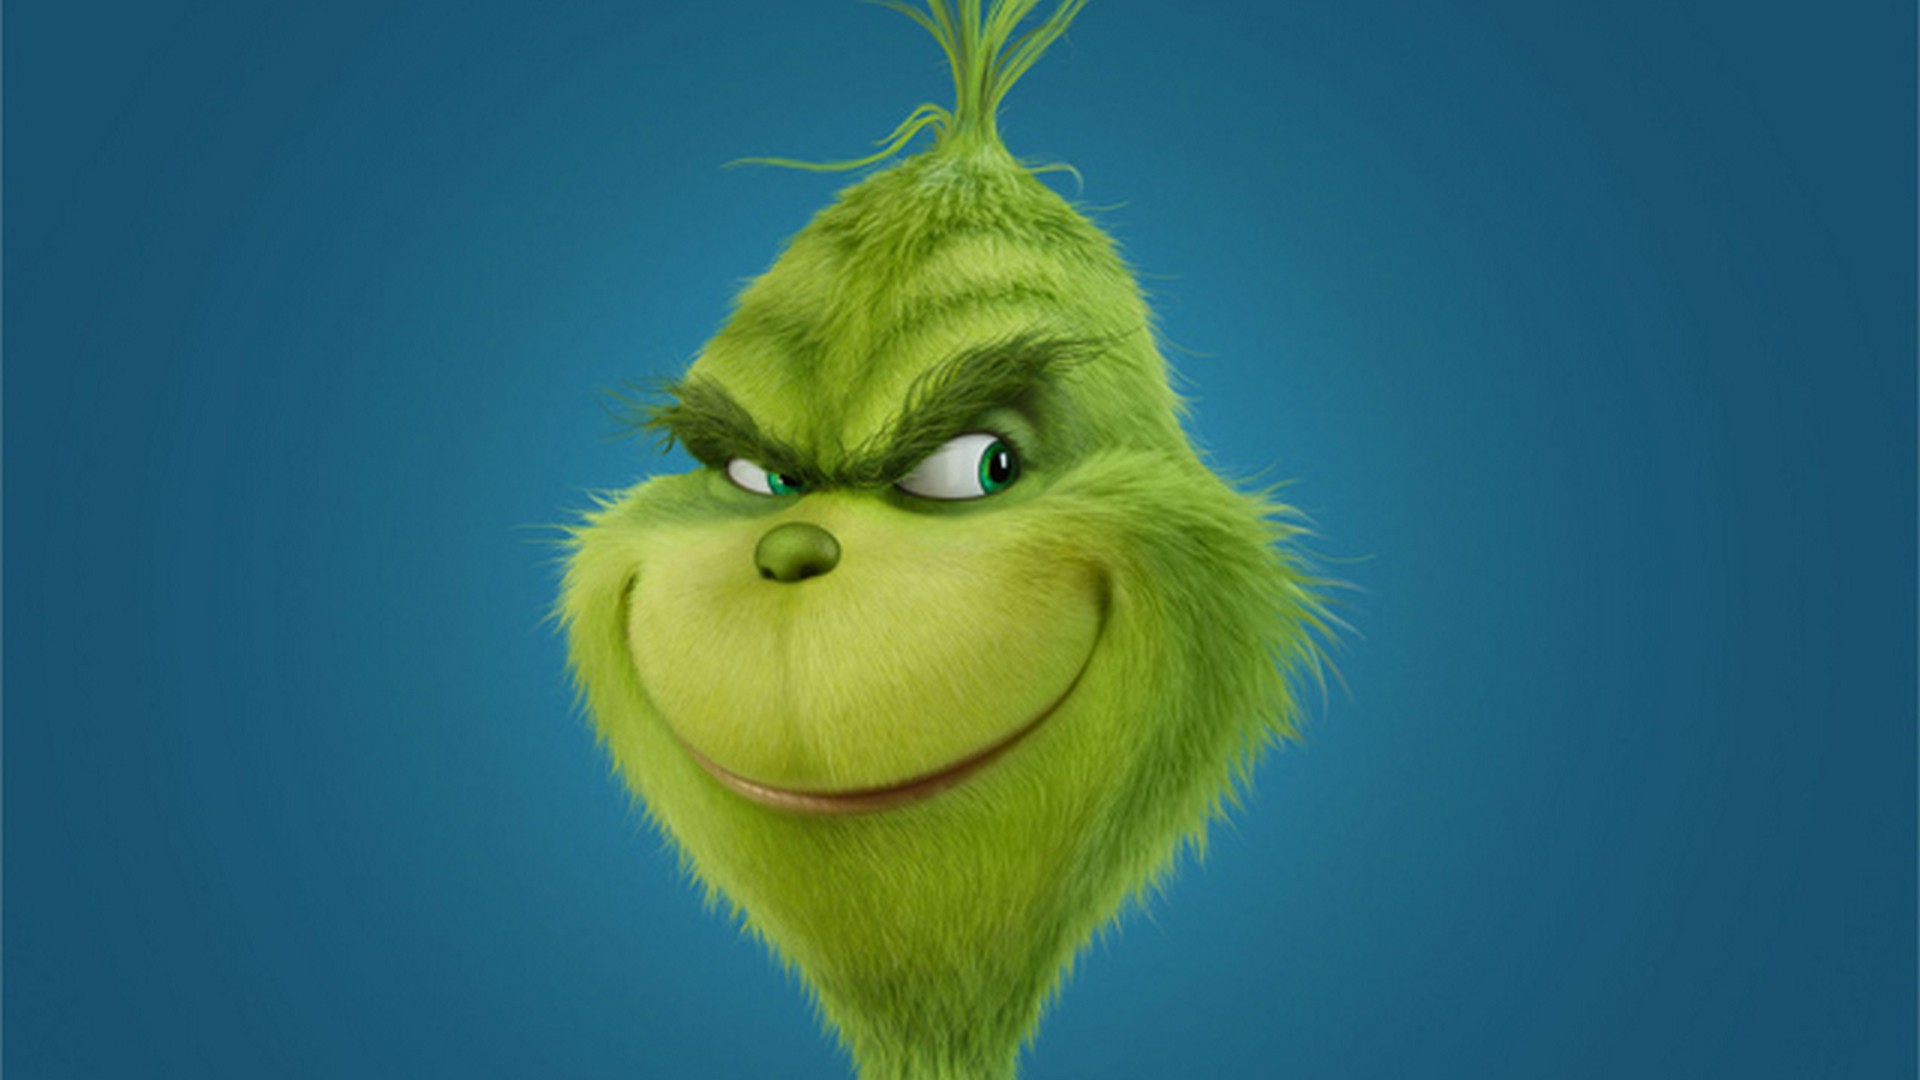 The Grinch Wallpaper with resolution 1920x1080 pixel. You can make this wallpaper for your Mac or Windows Desktop Background, iPhone, Android or Tablet and another Smartphone device